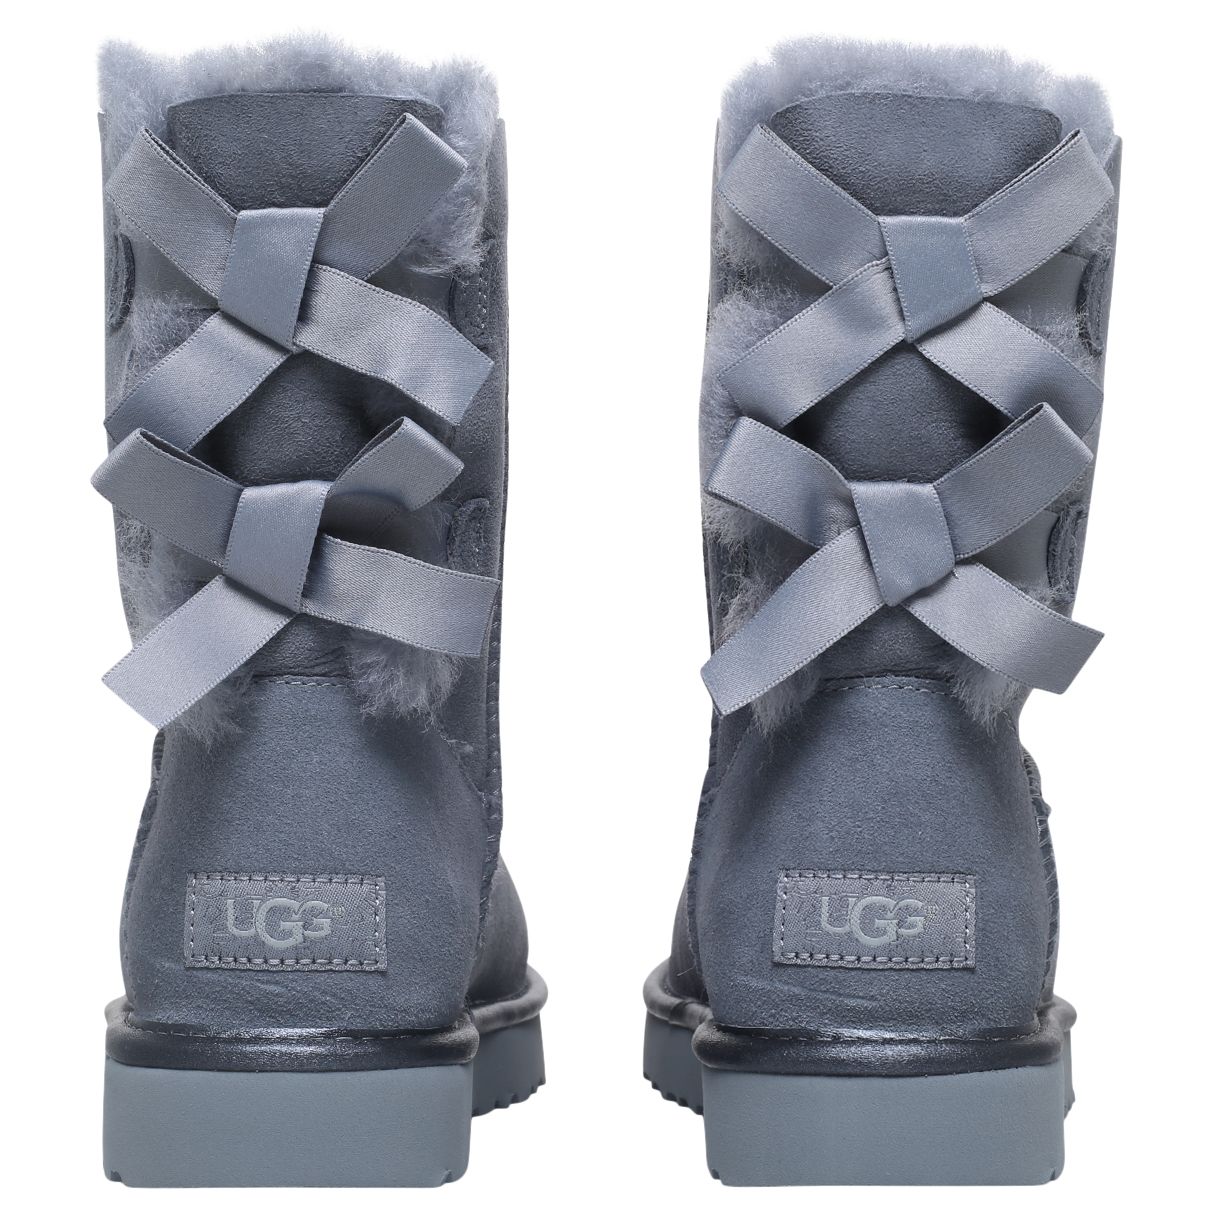 ugg boots 3 bows